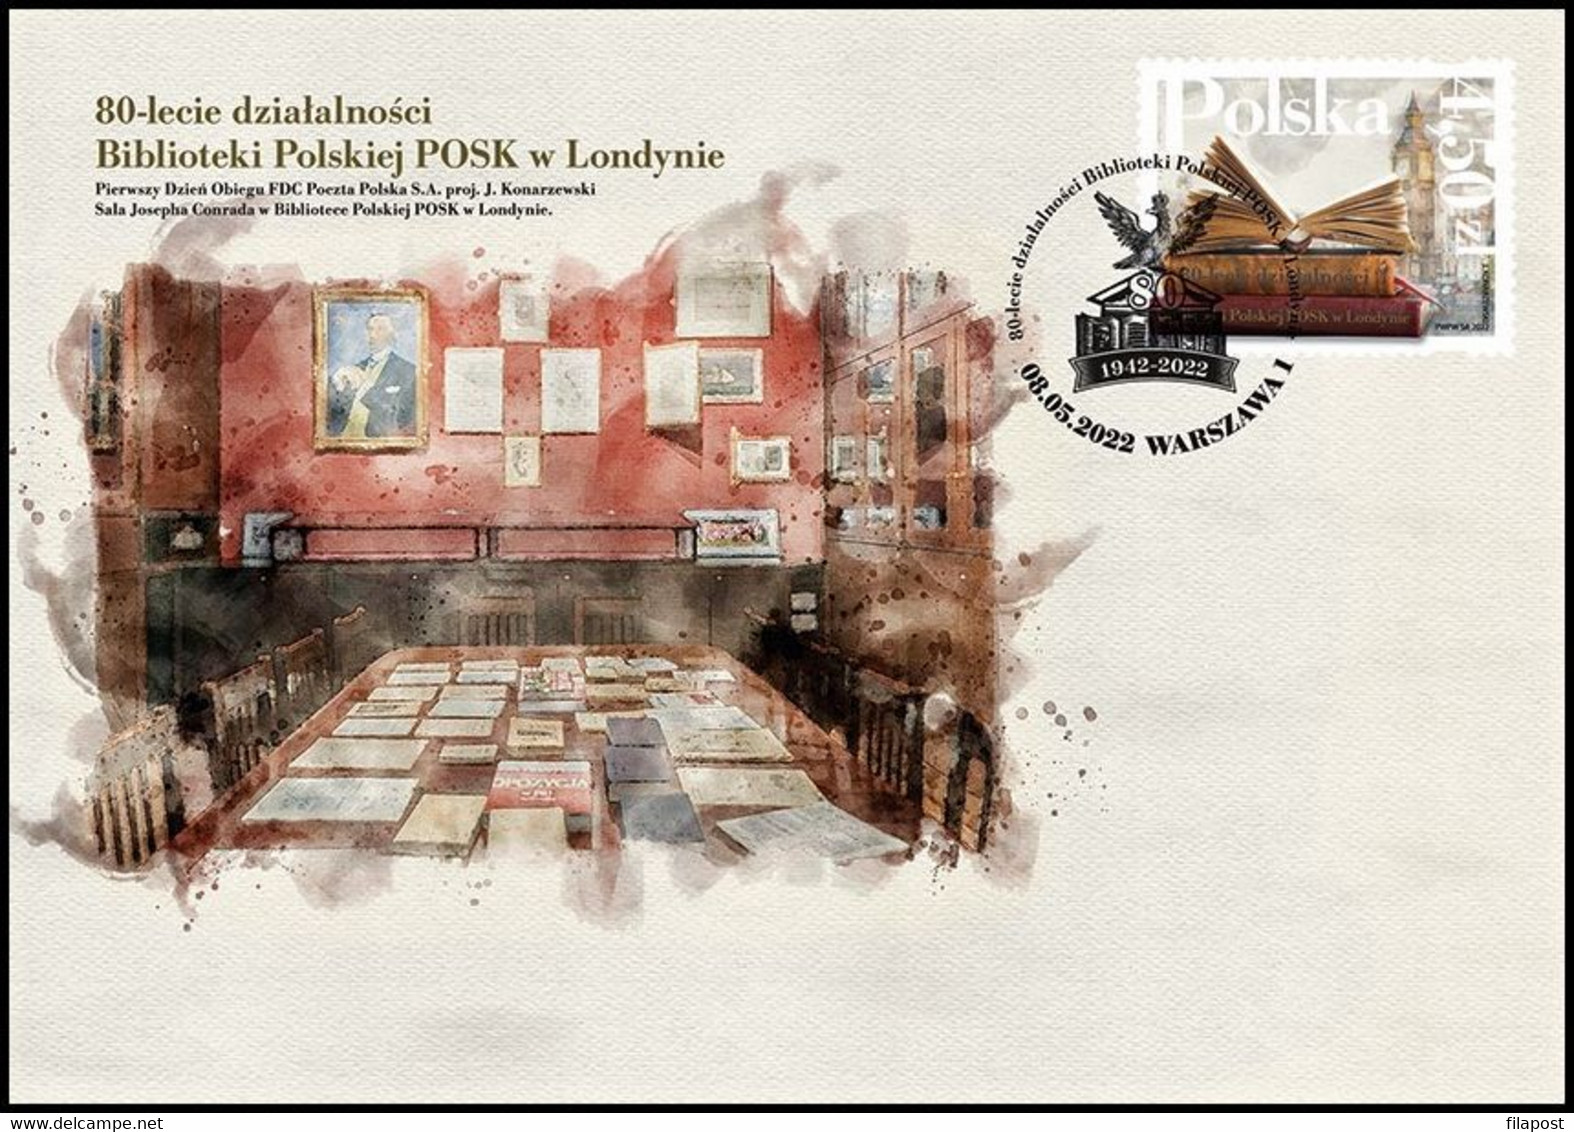 Poland 2022 / POSK Polish Library In London, Book, Big Ben Tower, Books, Archives, Manuscripts / Full Sheet FDC New!!! - Lettres & Documents